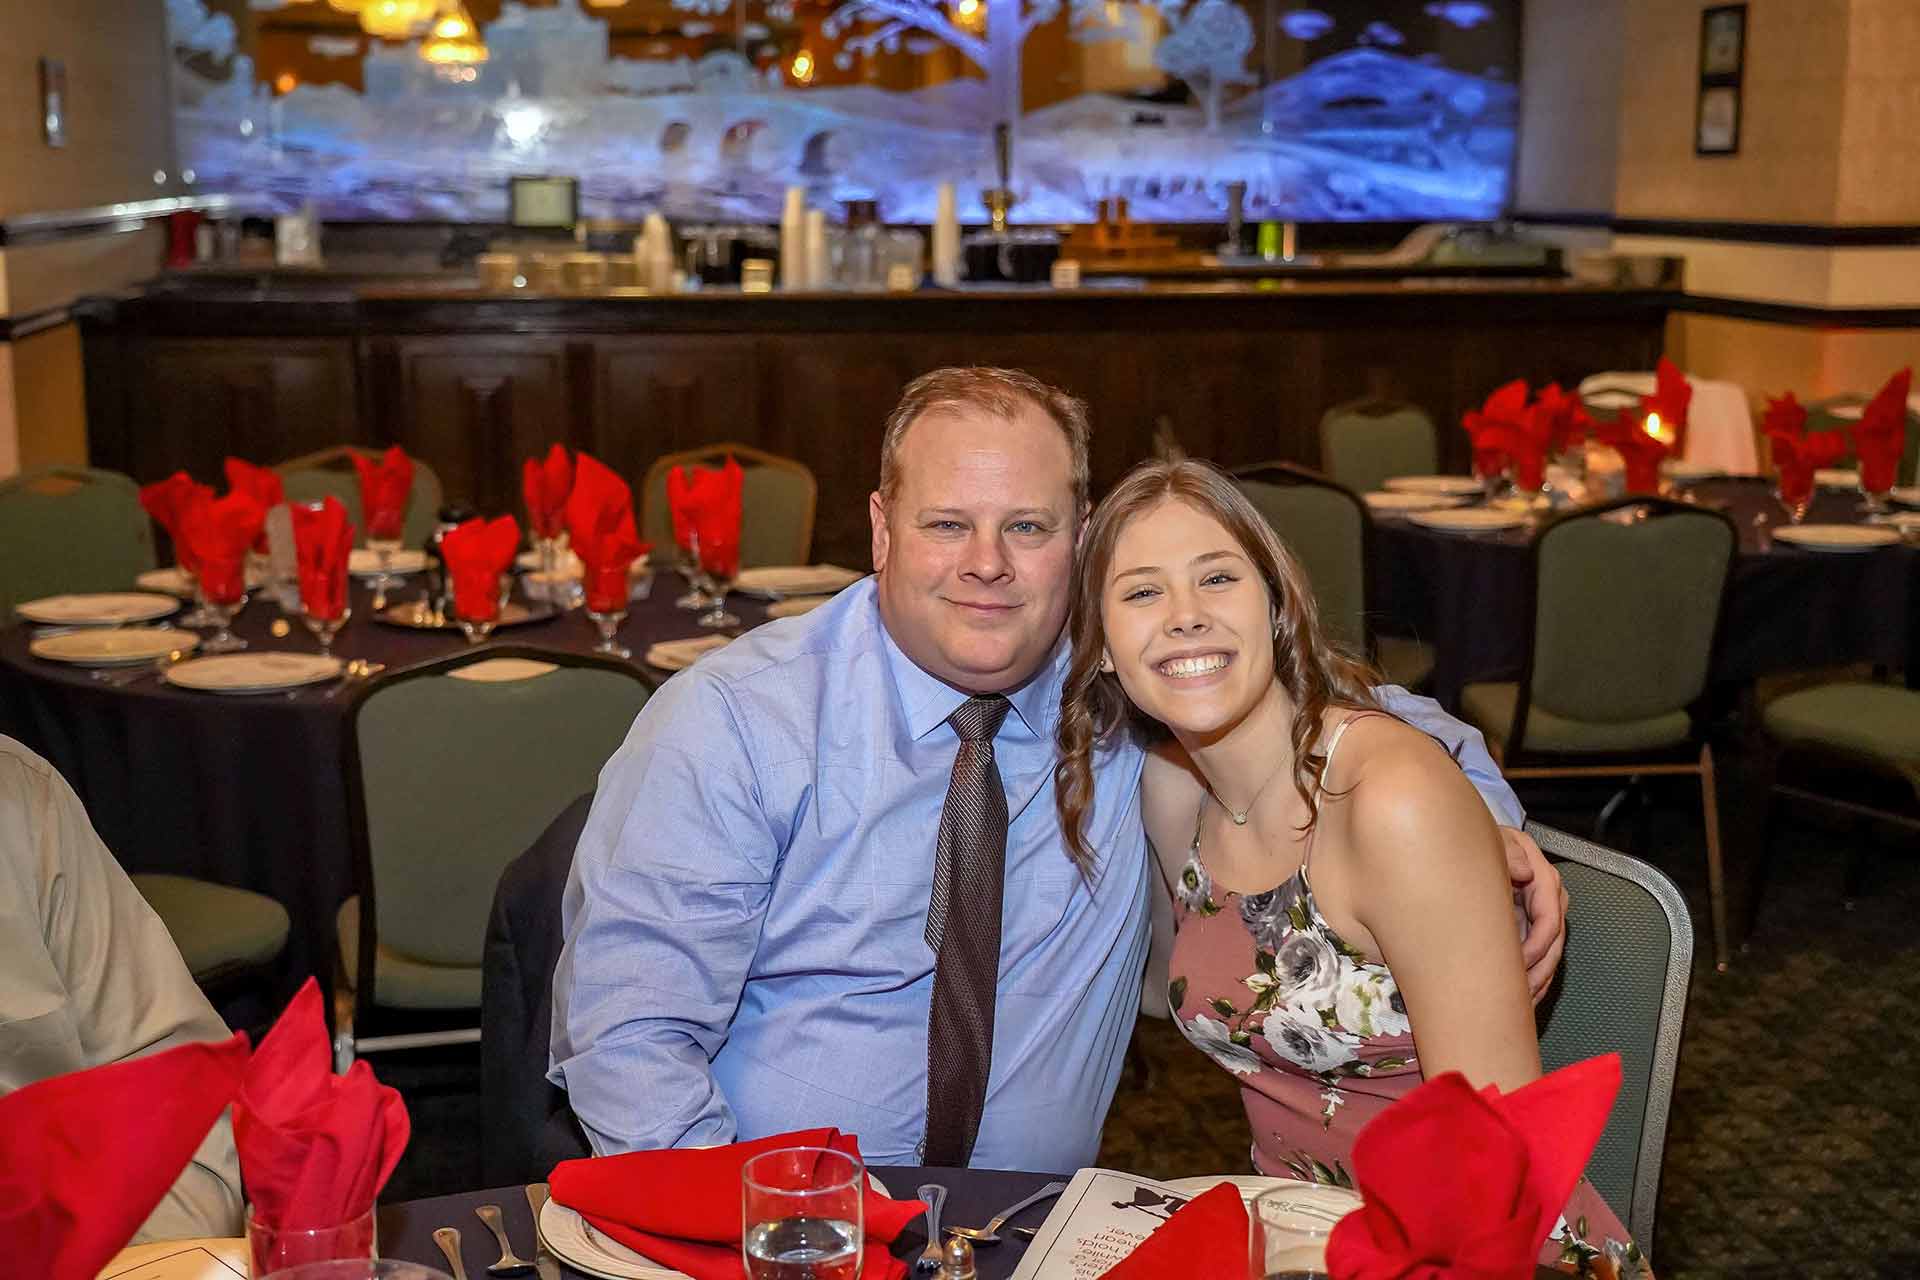 father-daughter-dance-2019-father-and-daughter-smiling-at-table